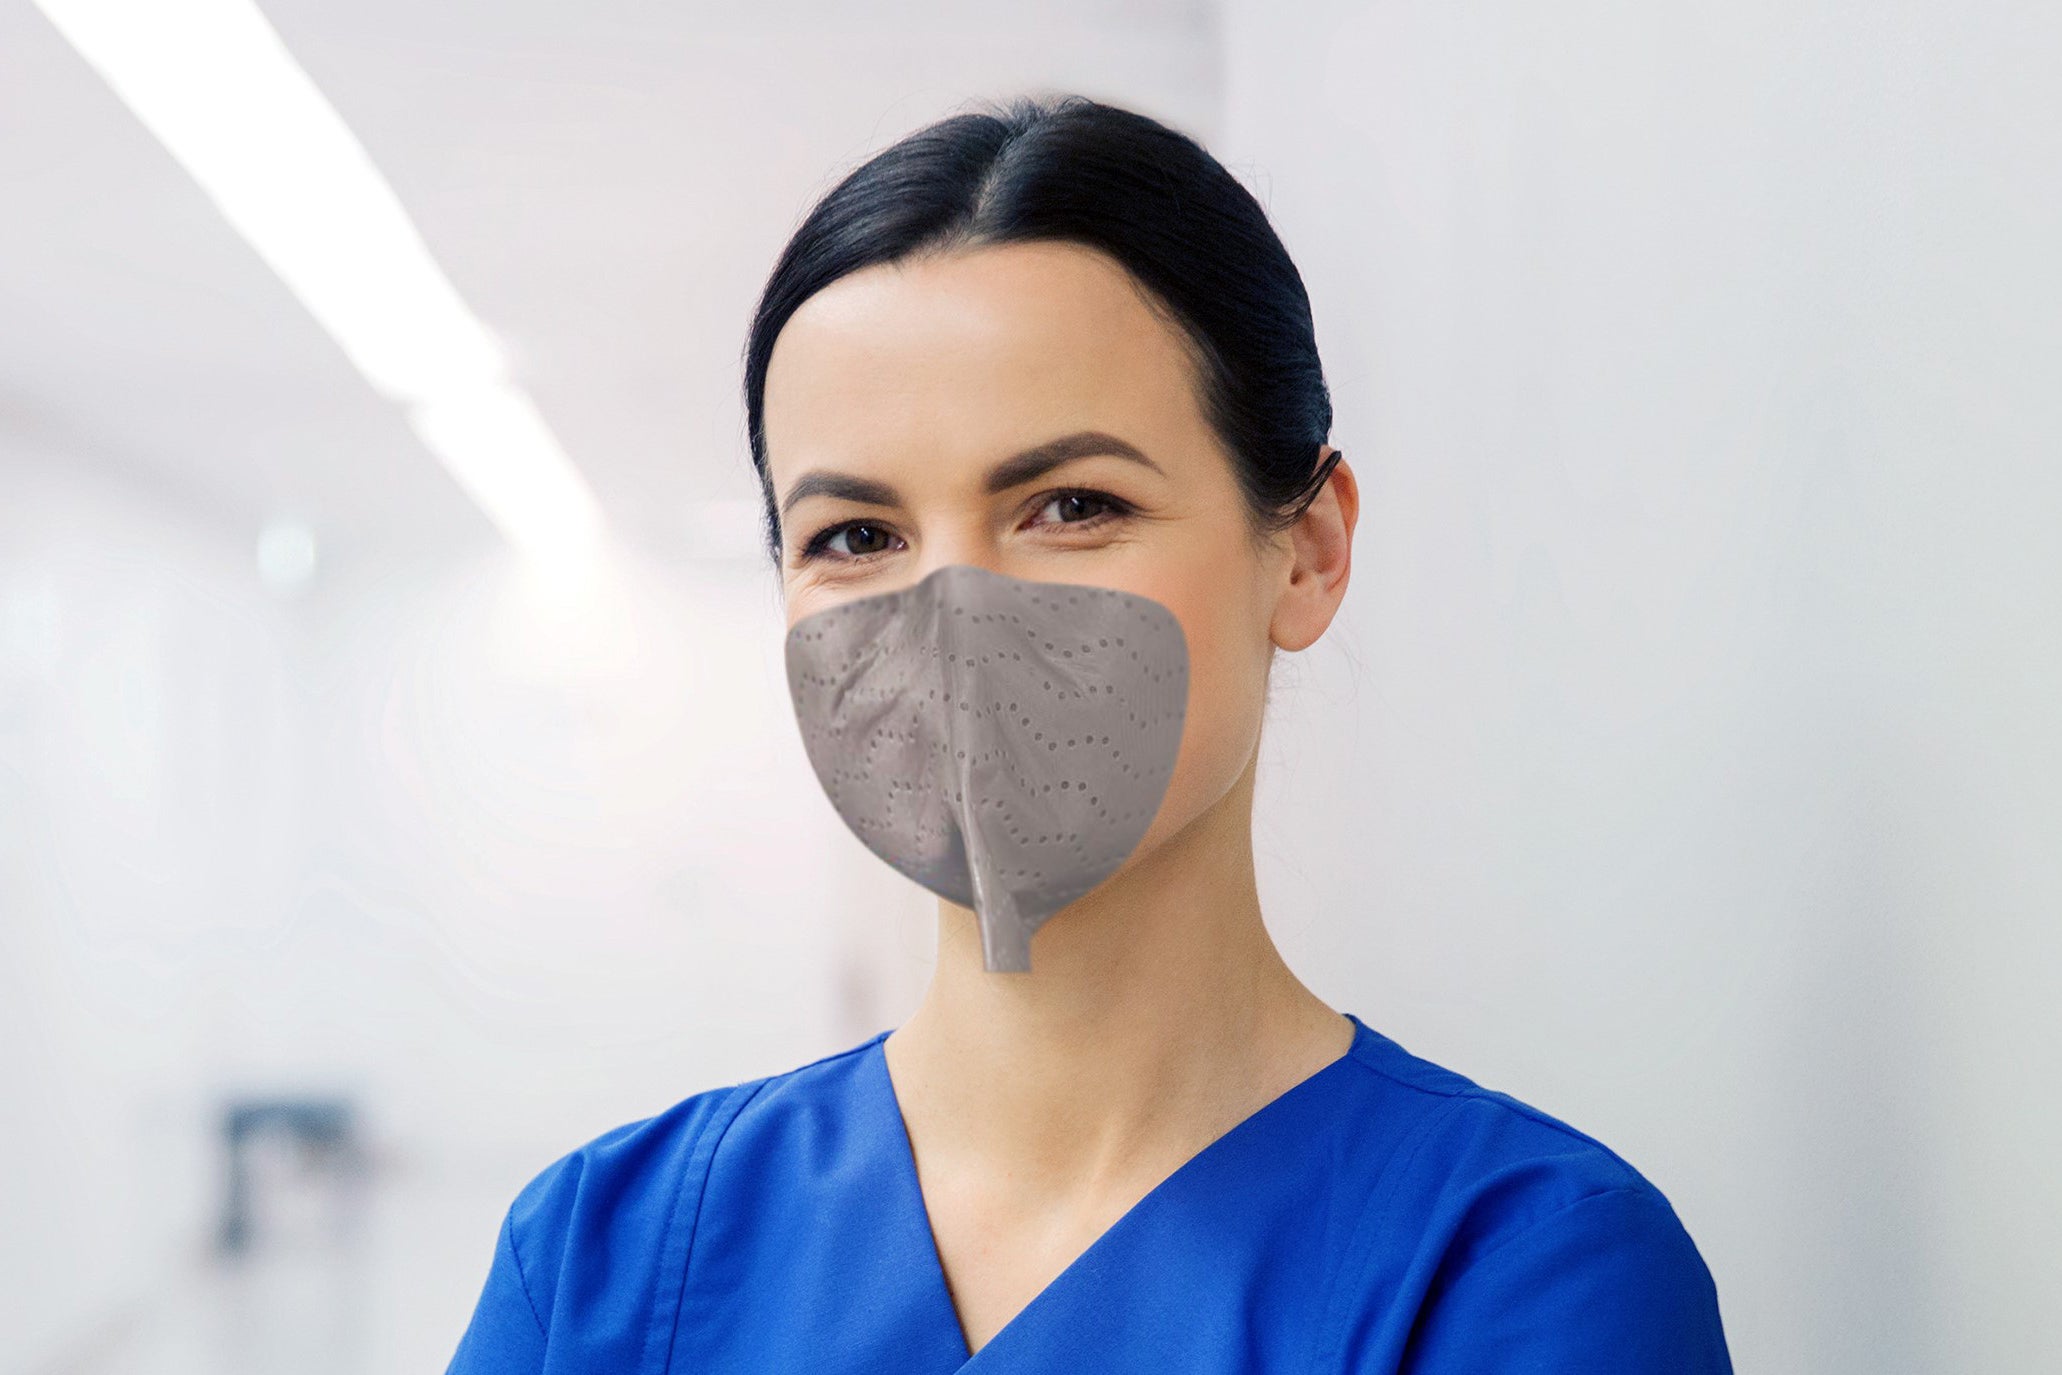 Strapless ReadiMask adheres directly to the wearer's skin.